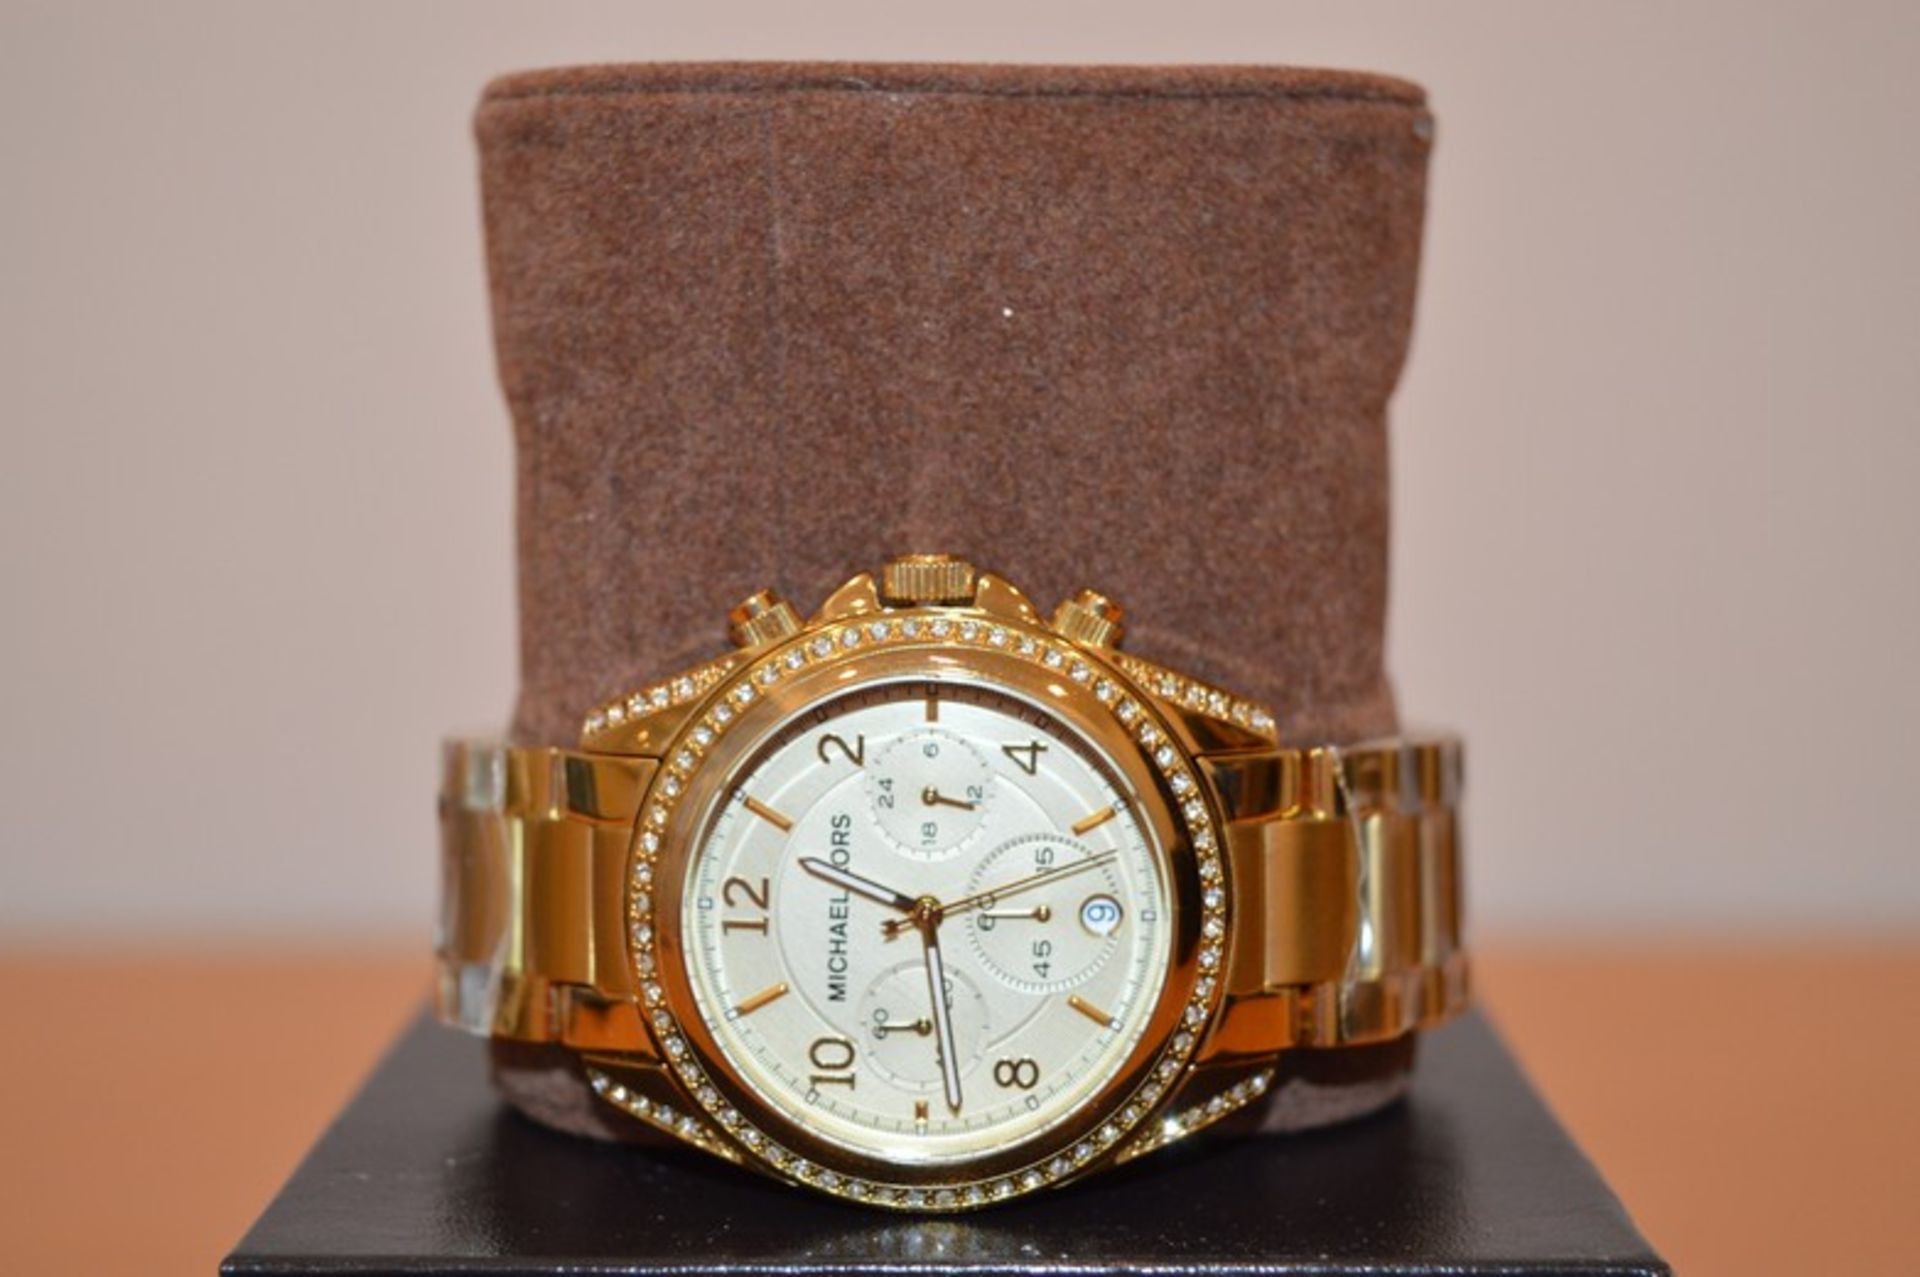 BOXED MICHEAL KORS LADIES GOLD DESIGNER WRIST WATCH RRP £279.99 (MD-WATCH)